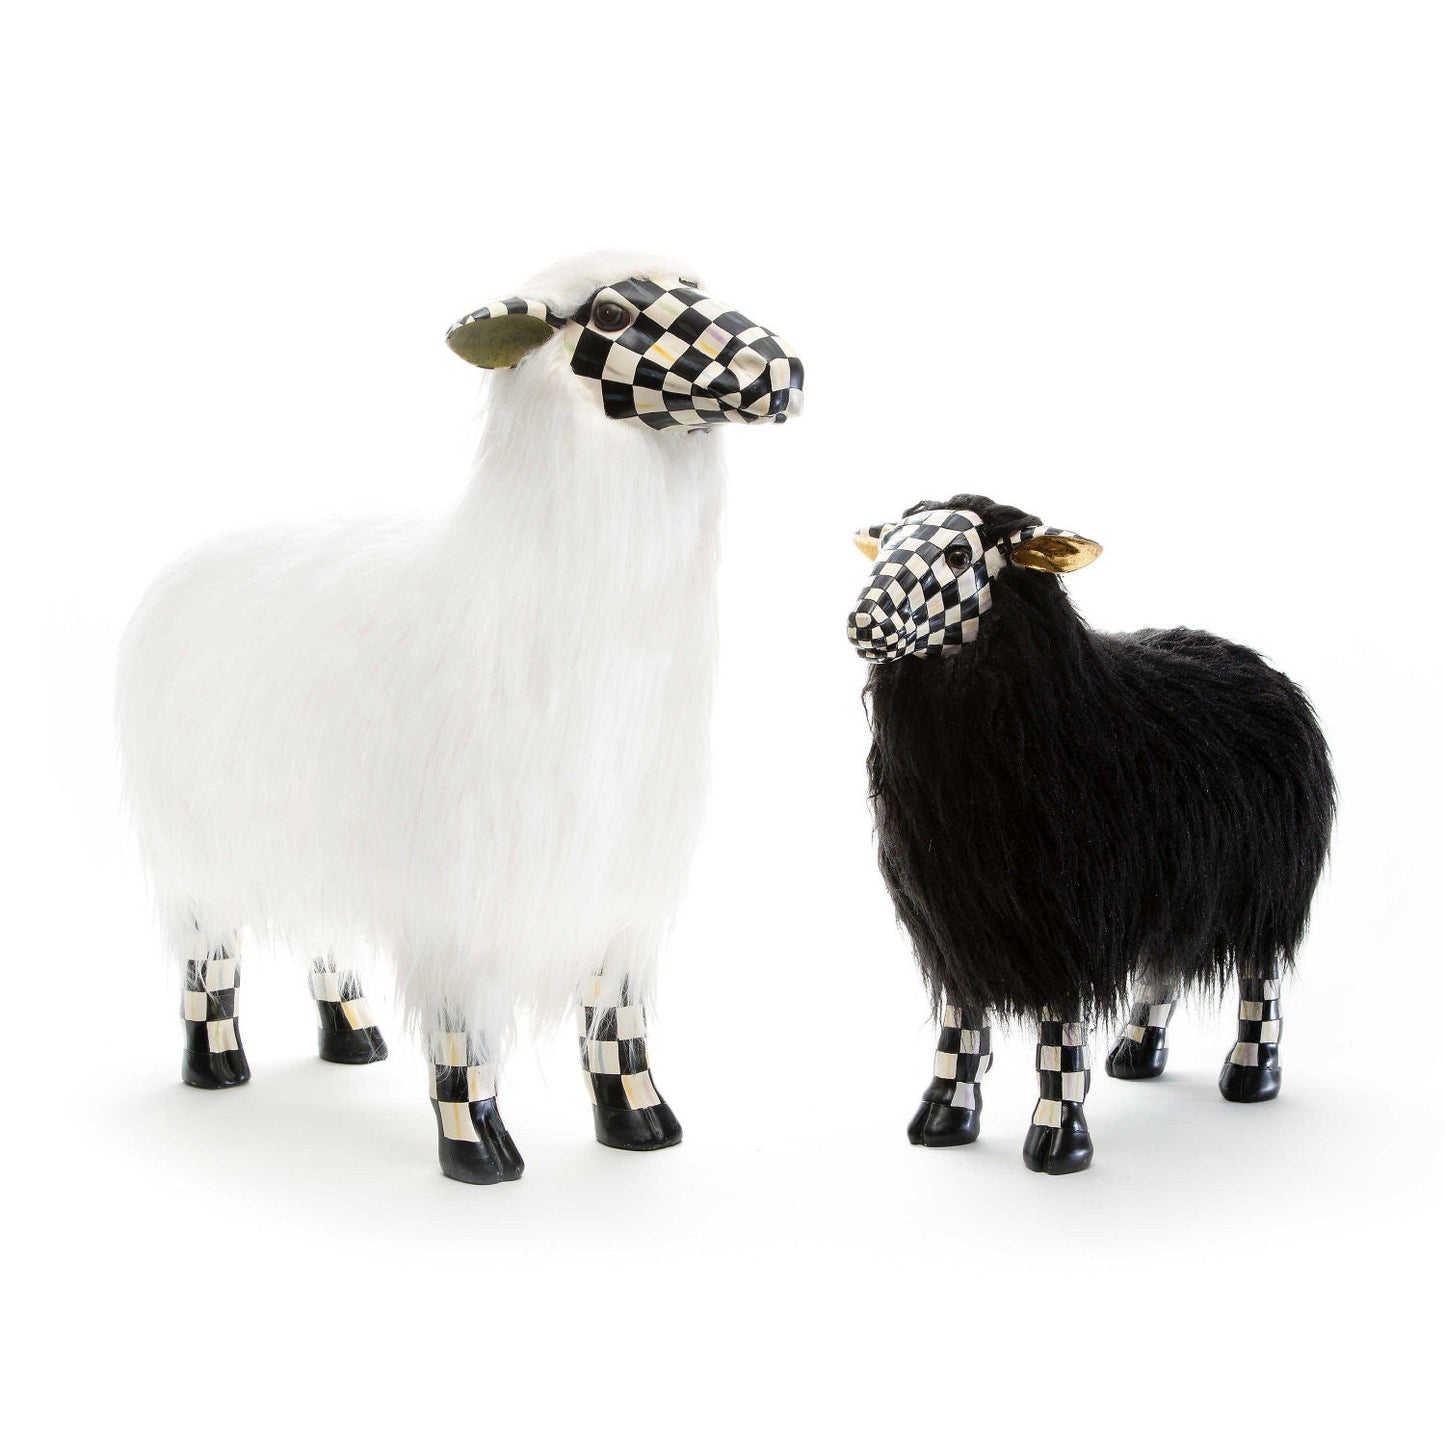 Courtly Check Black Sheep - Small - |VESIMI Design| Luxury Bathrooms and Home Decor